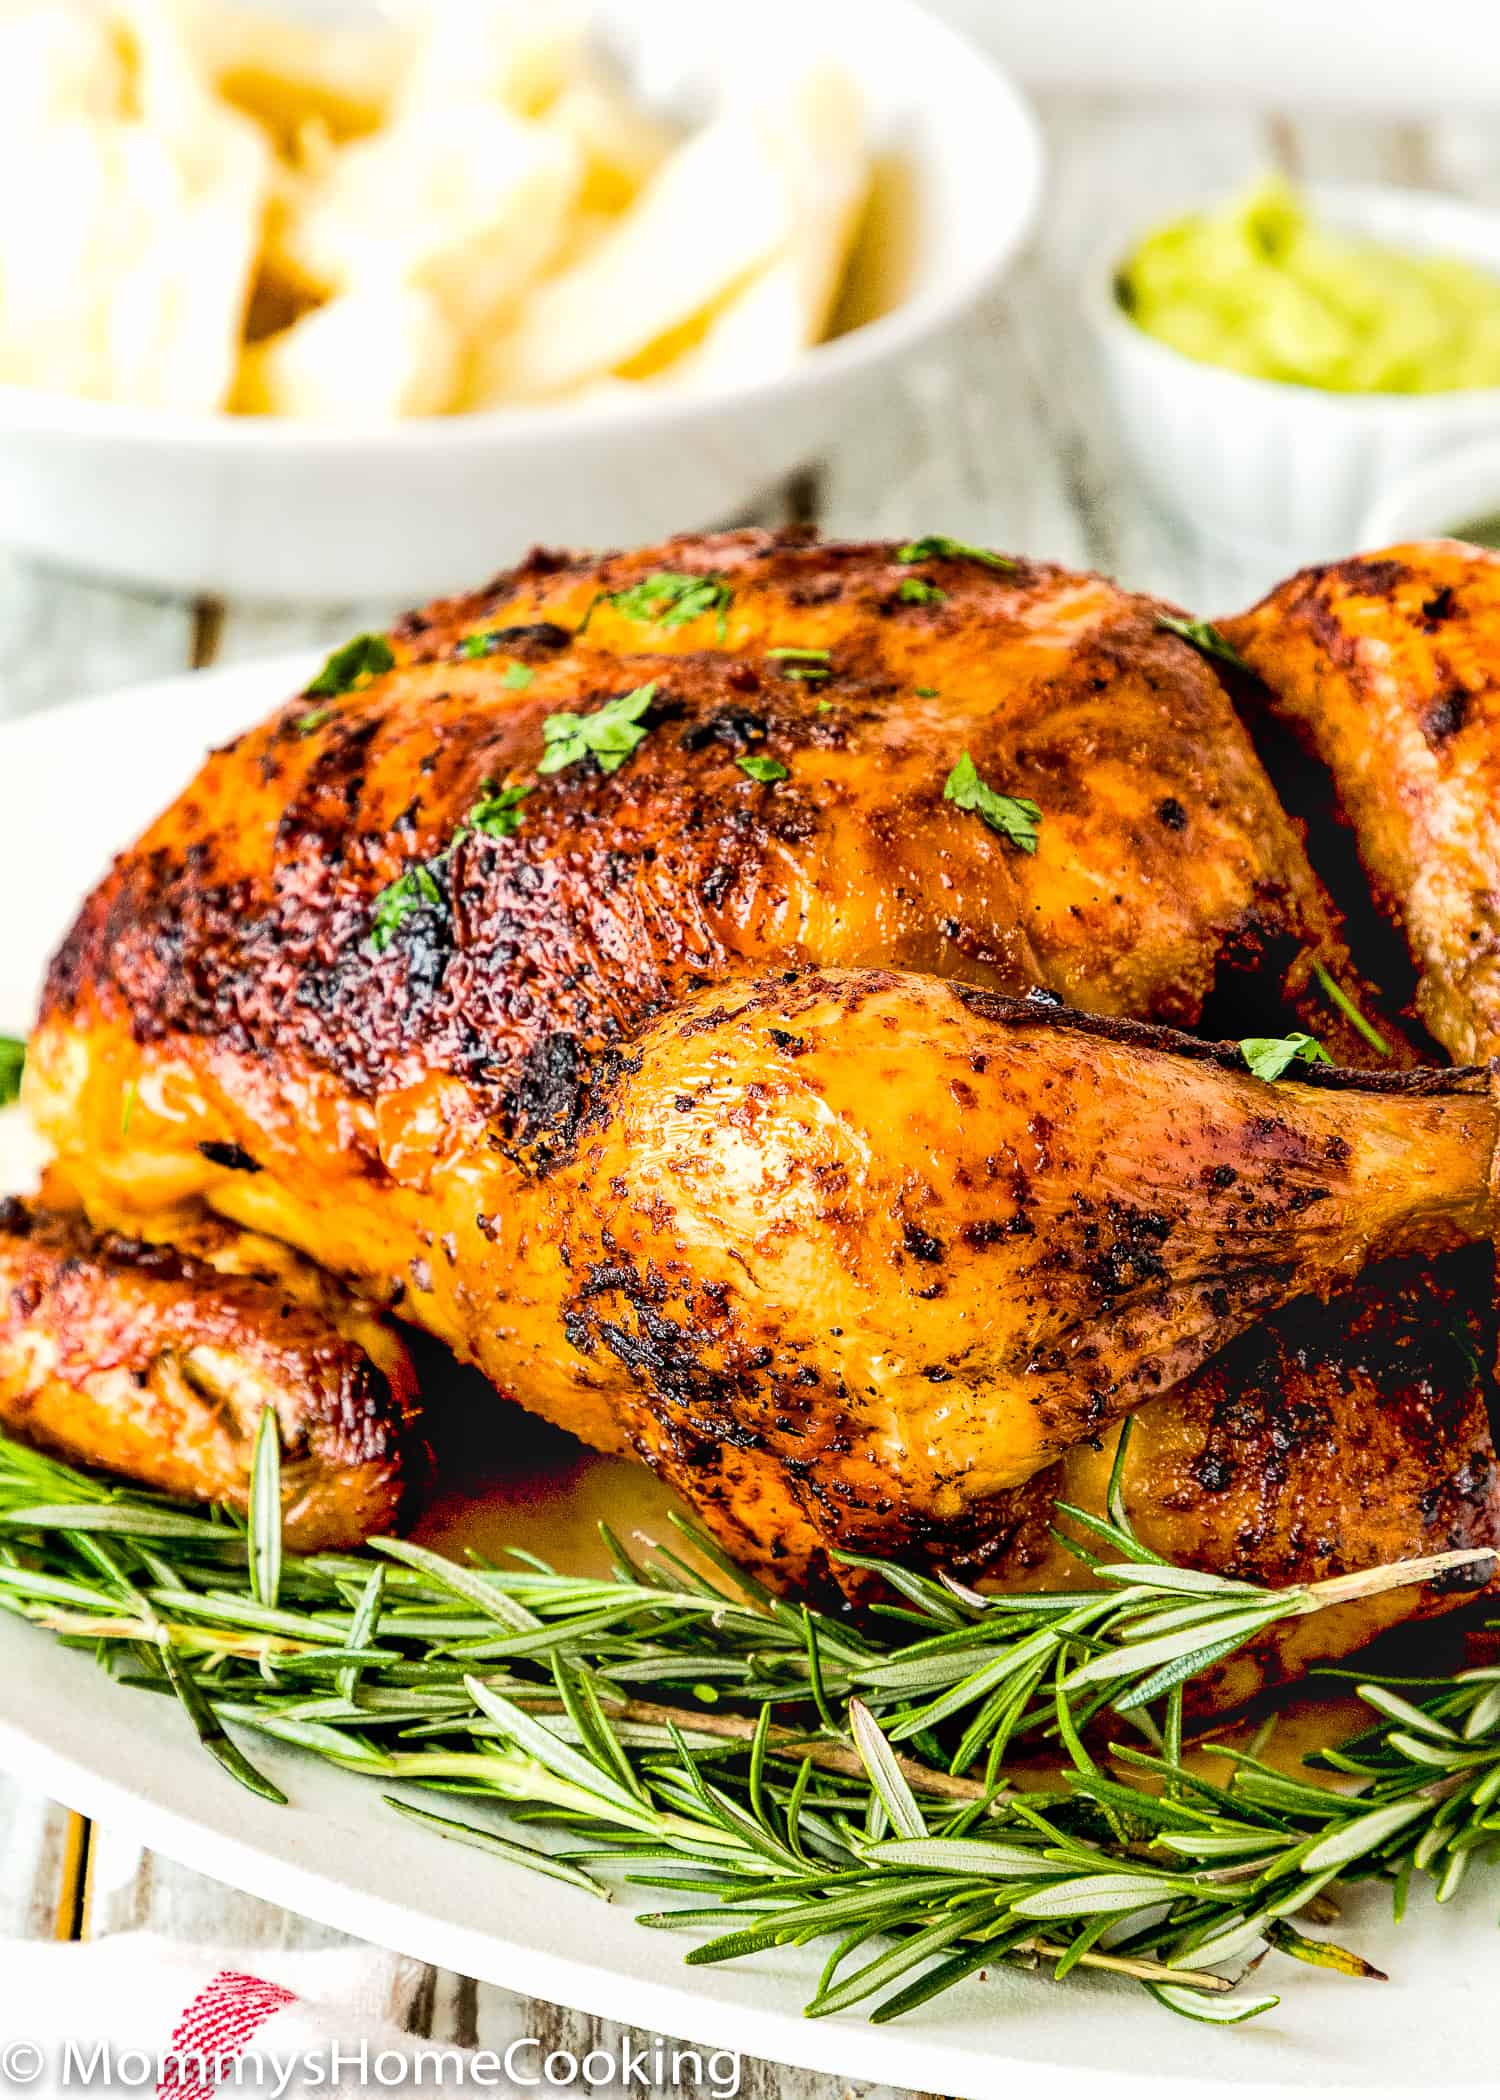 Easy Venezuelan Roasted Chicken - Mommy's Home Cooking